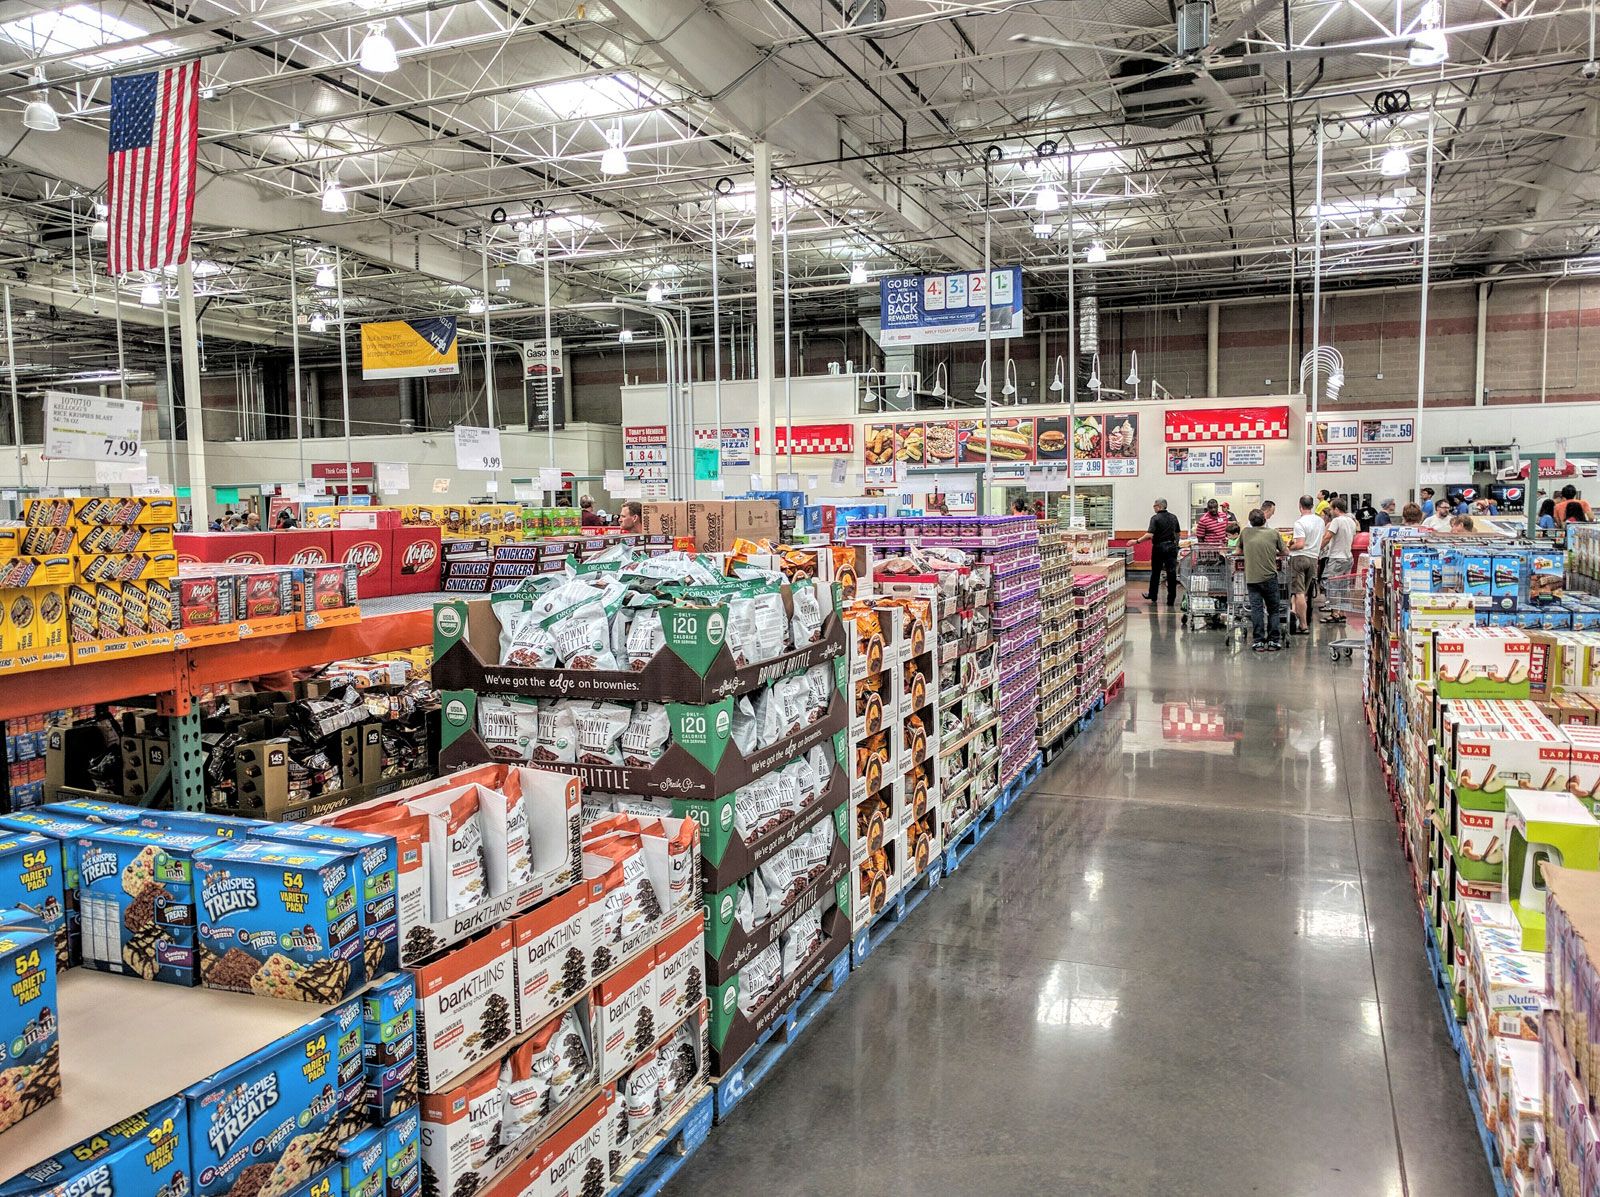 Costco Canada says they will not be resuming food sampling in